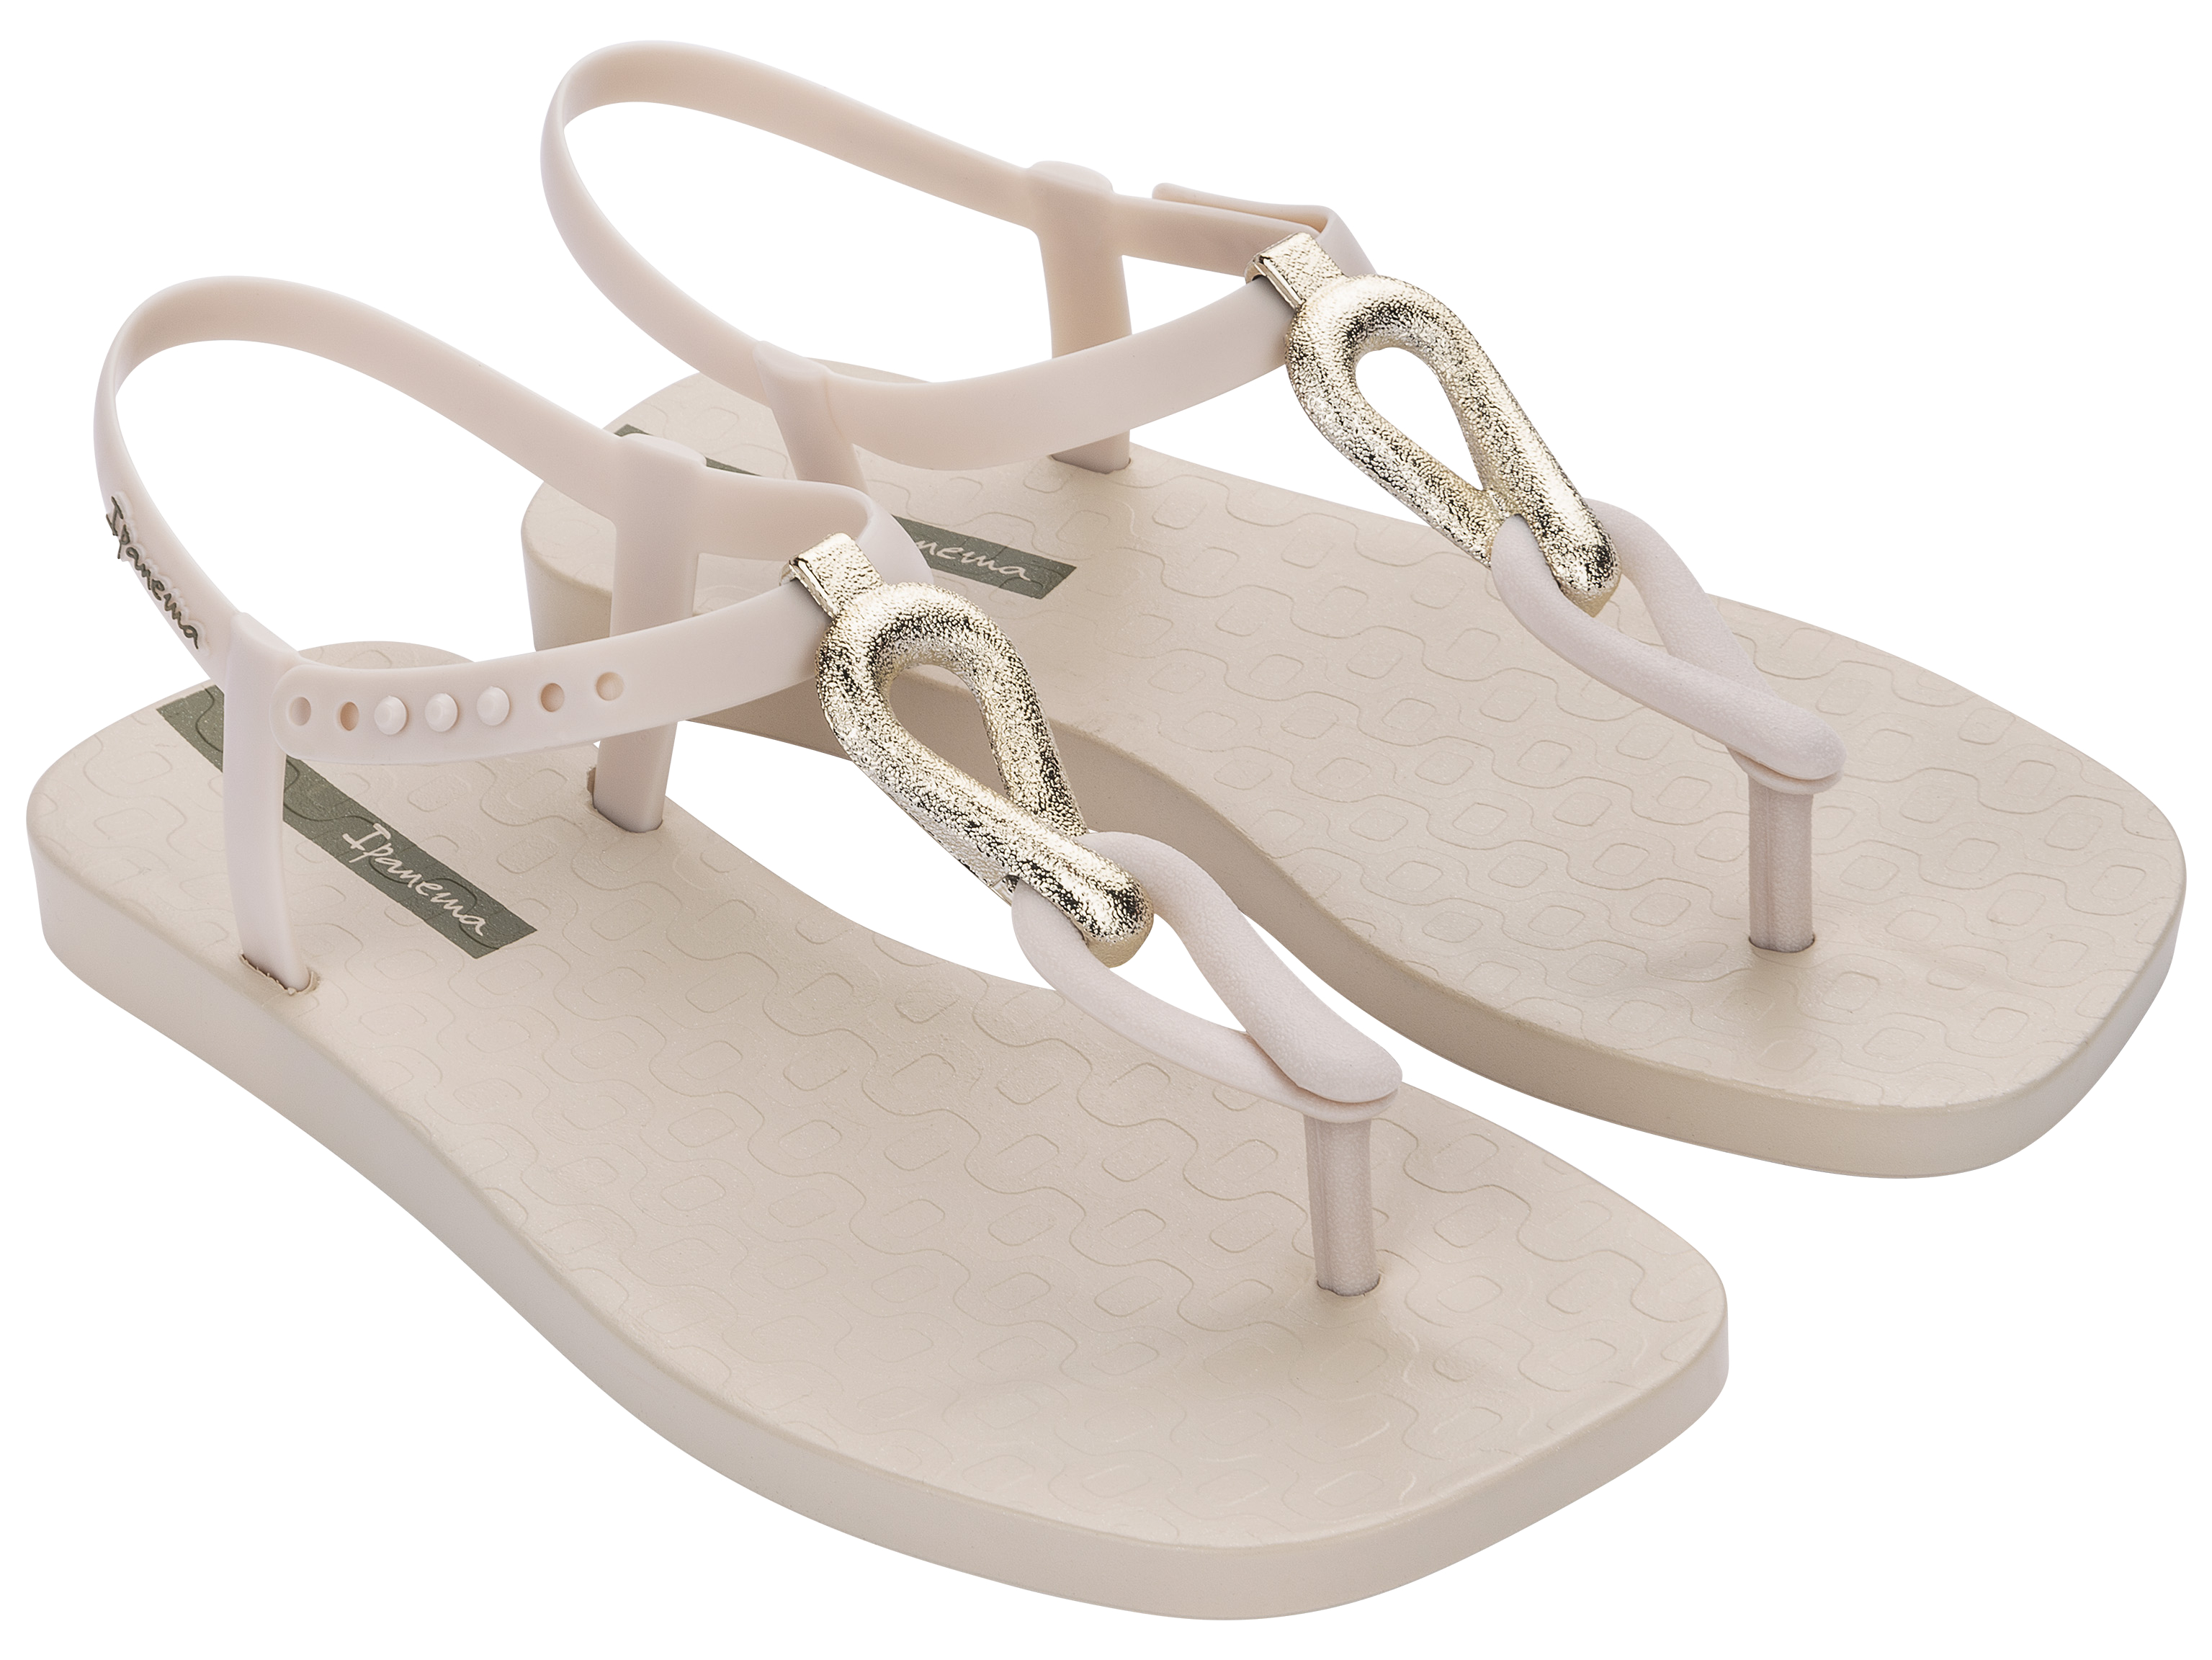 ontspannen eerste Claire IPANEMA BEIGE CLASS FEVER SHINE SANDAL | Rosella - Style inspired by  elegance